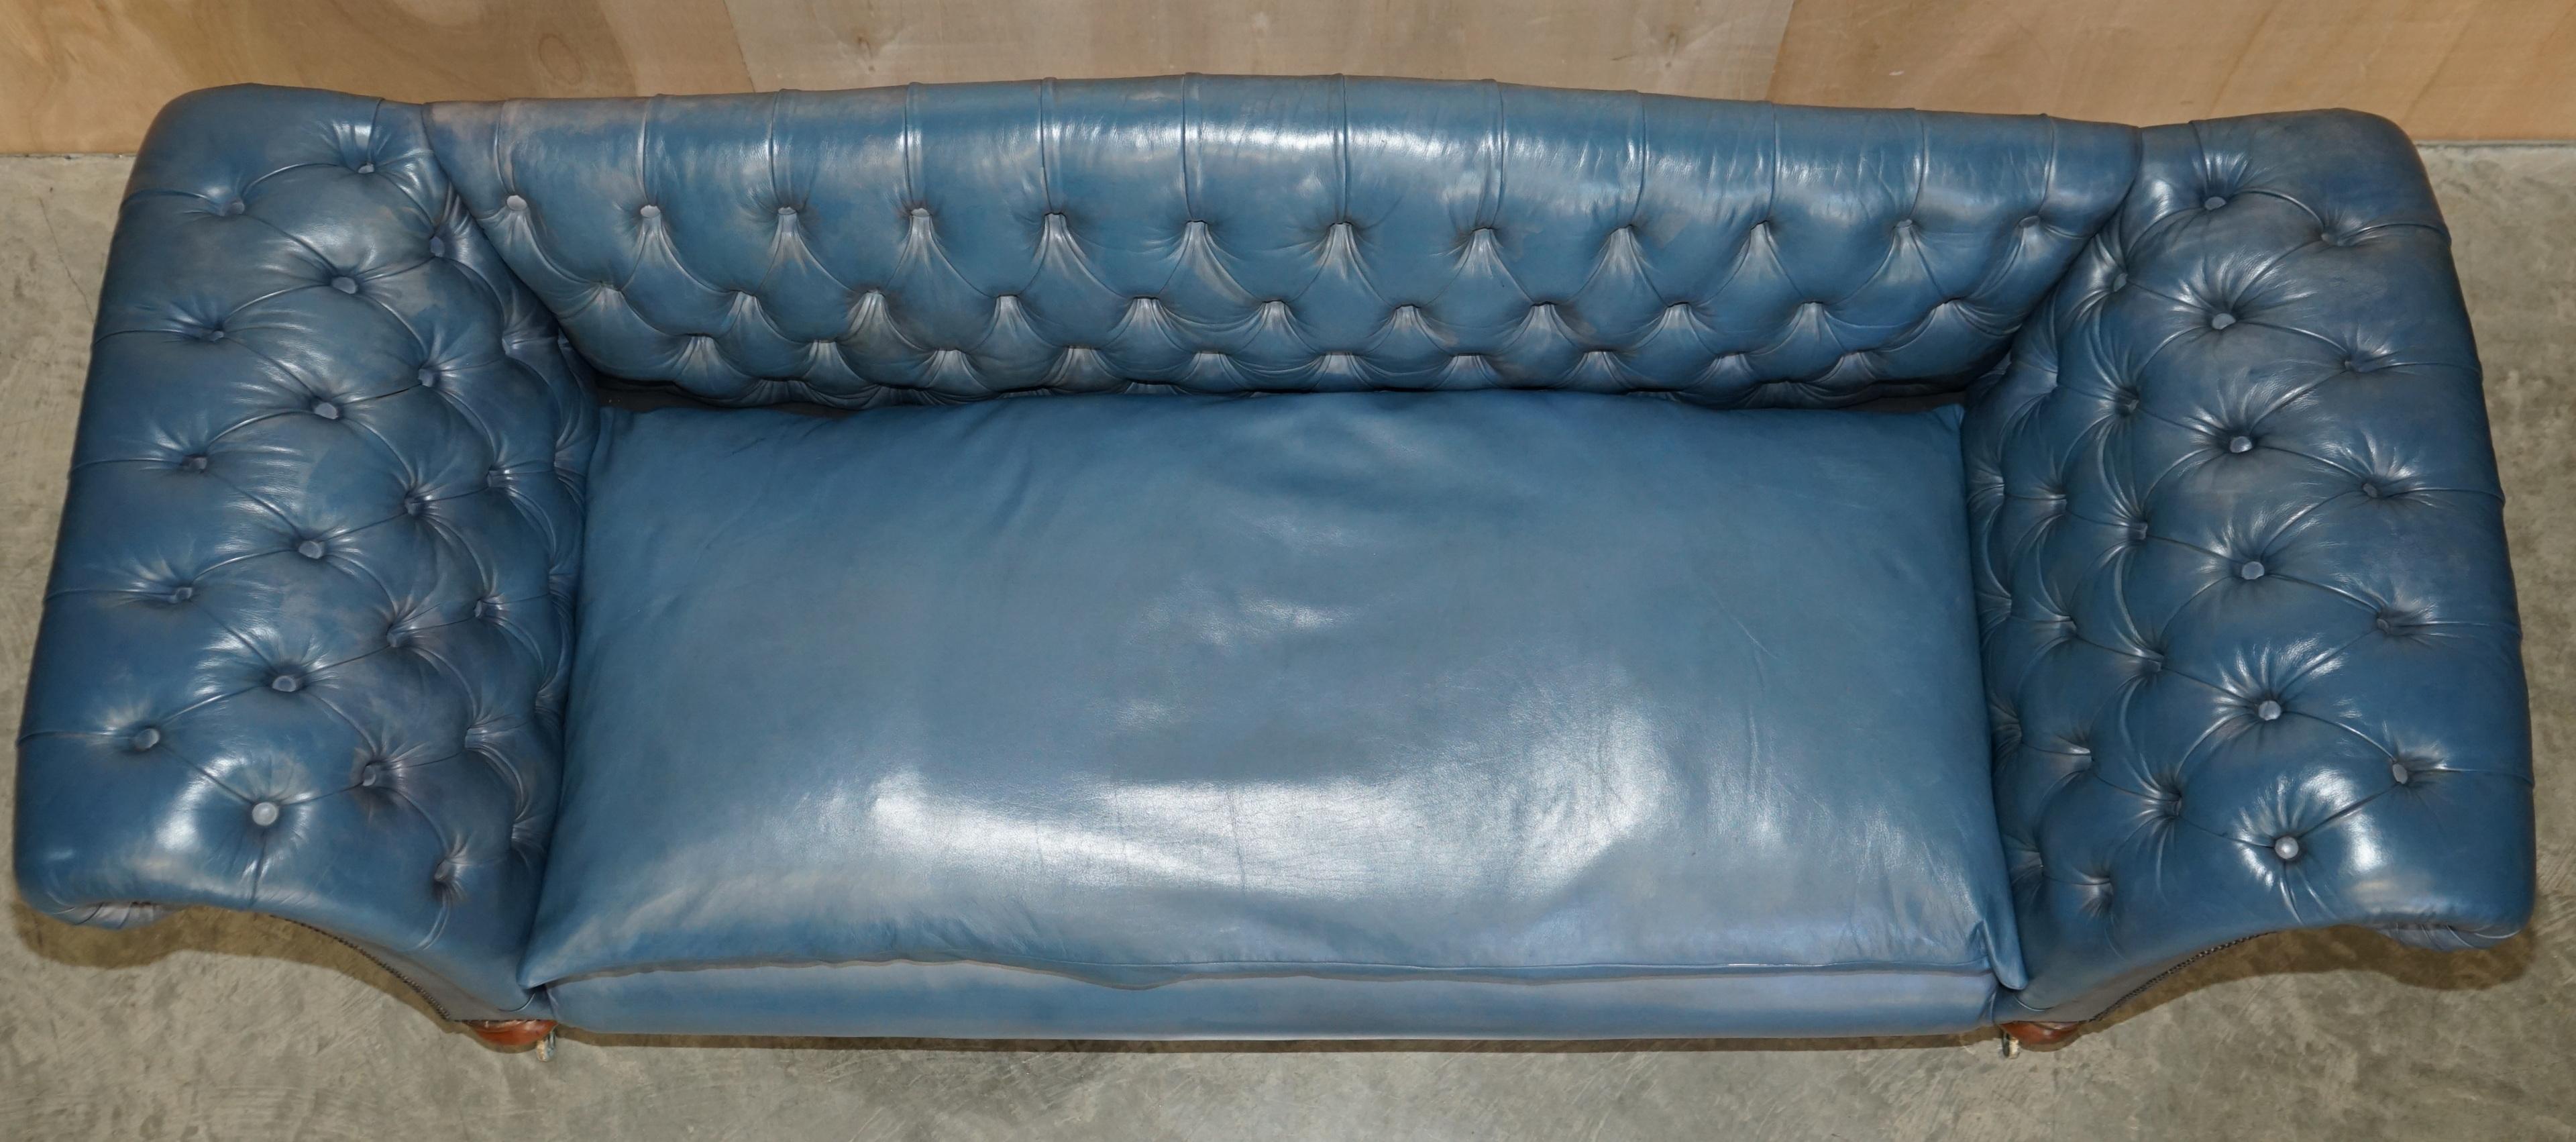 RESTORED WILLIAM IV CIRCA 1830 CHESTERFiELD REGENCY BLUE LEATHER HUMP BACK SOFA For Sale 9